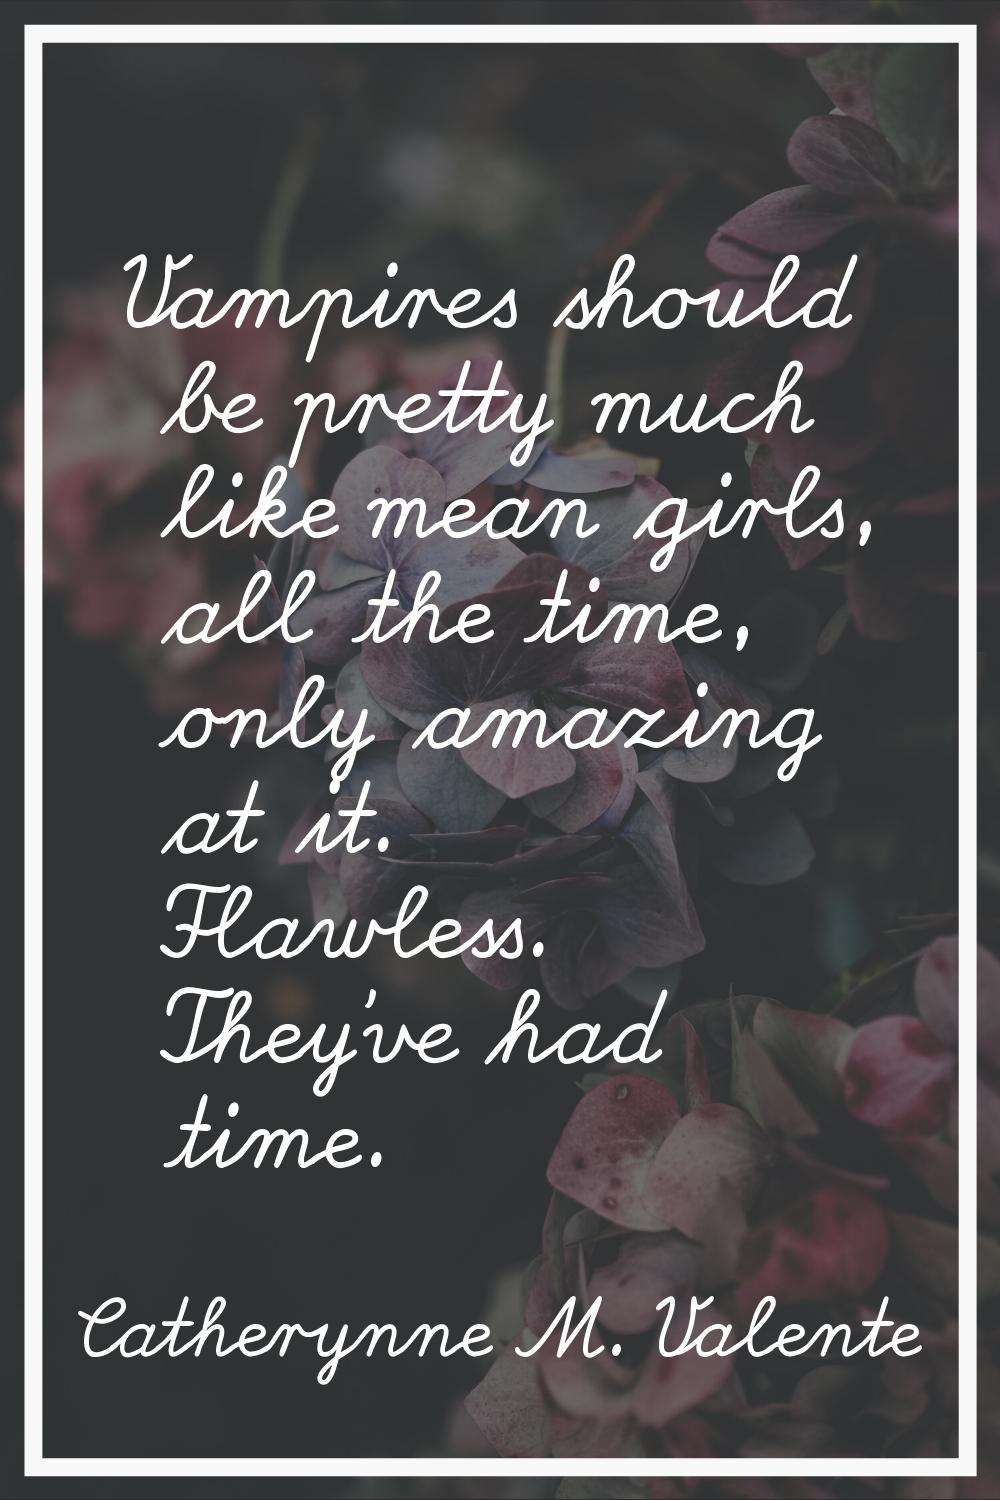 Vampires should be pretty much like mean girls, all the time, only amazing at it. Flawless. They've